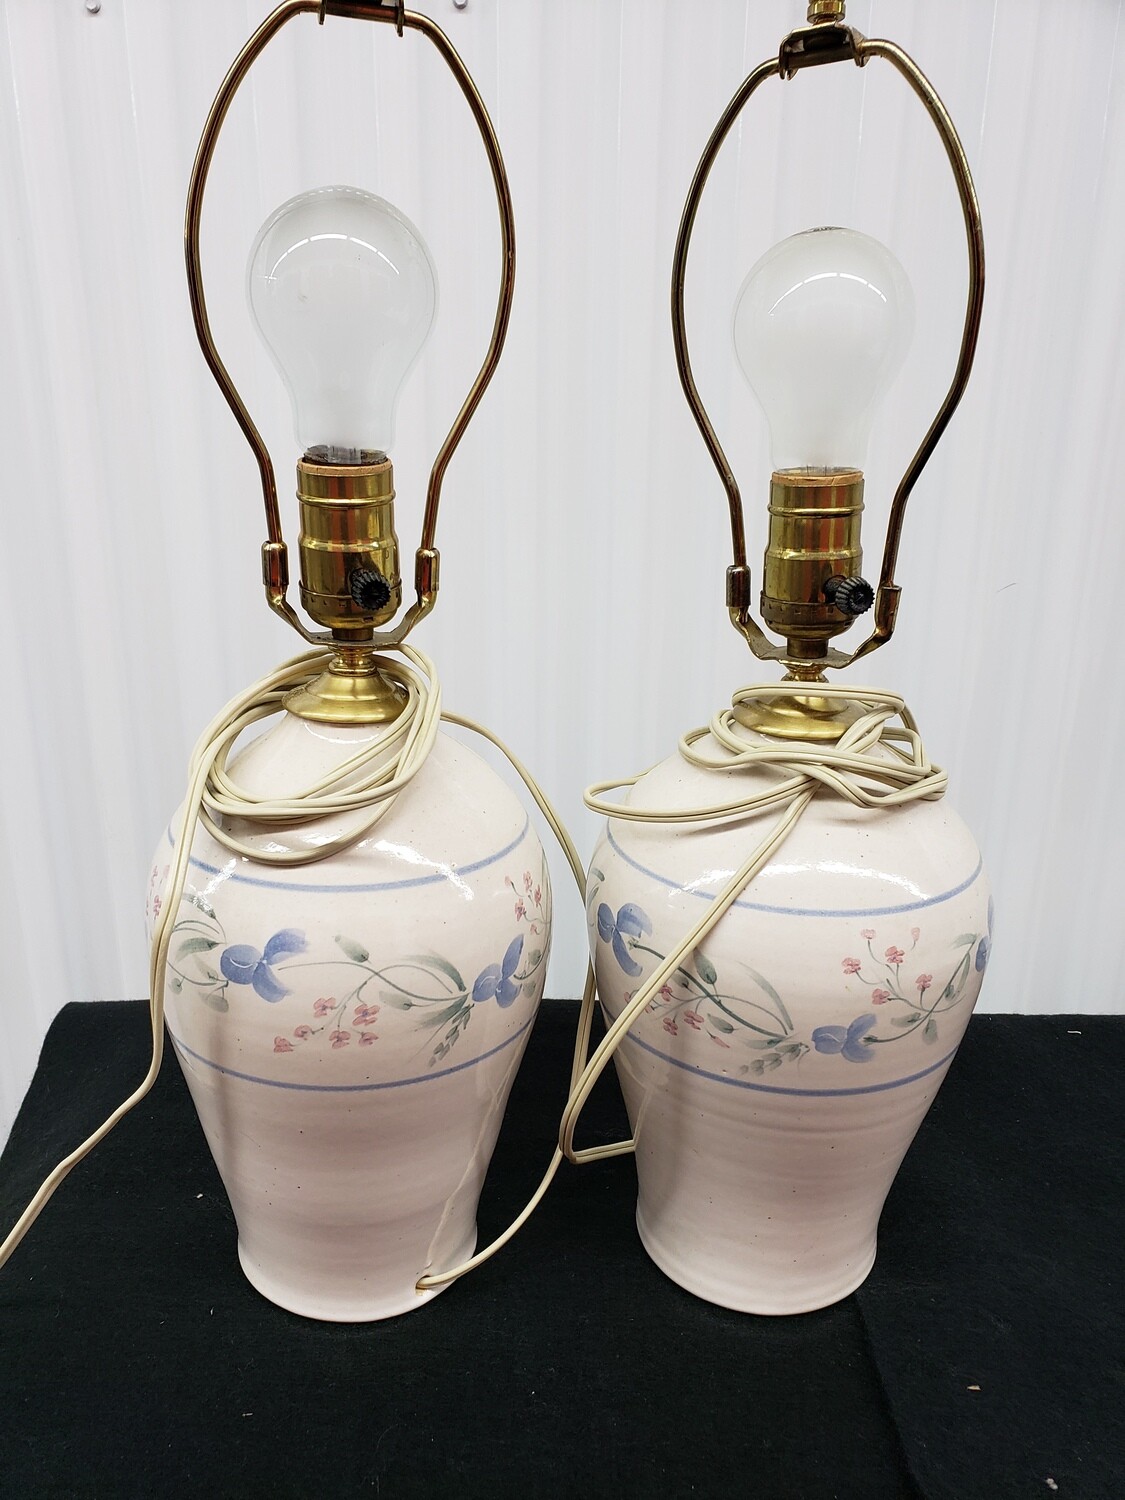 Lamps pink/blue flowers, no shades, PAIR #2314